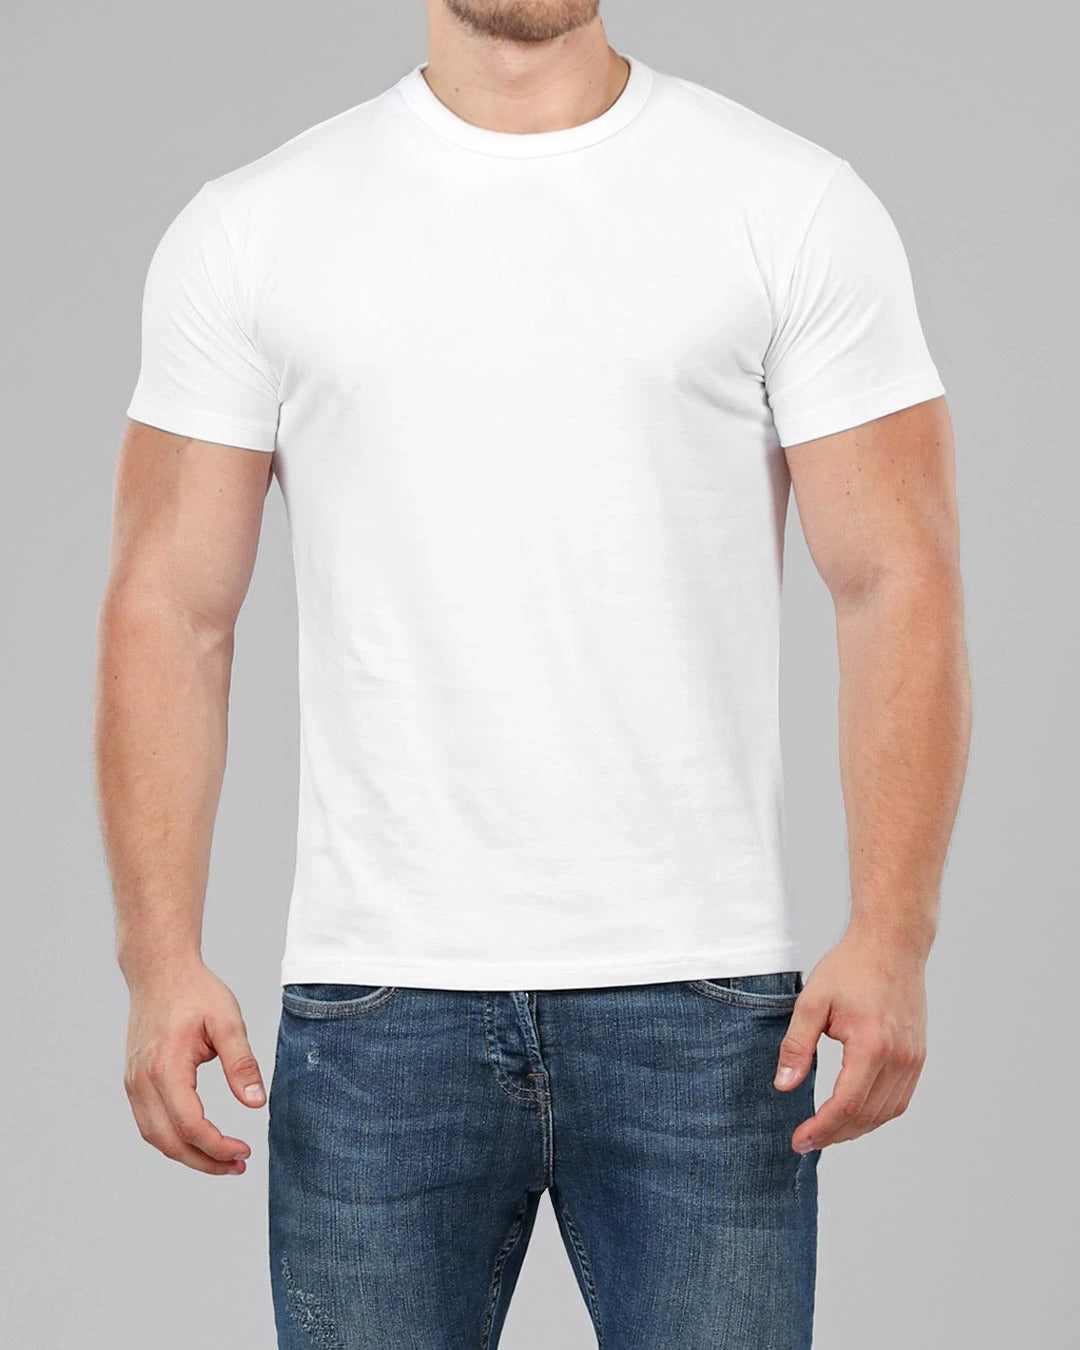 halvt At give tilladelse Catena Men's White Crew Neck Fitted Plain T-Shirt | Muscle Fit Basics